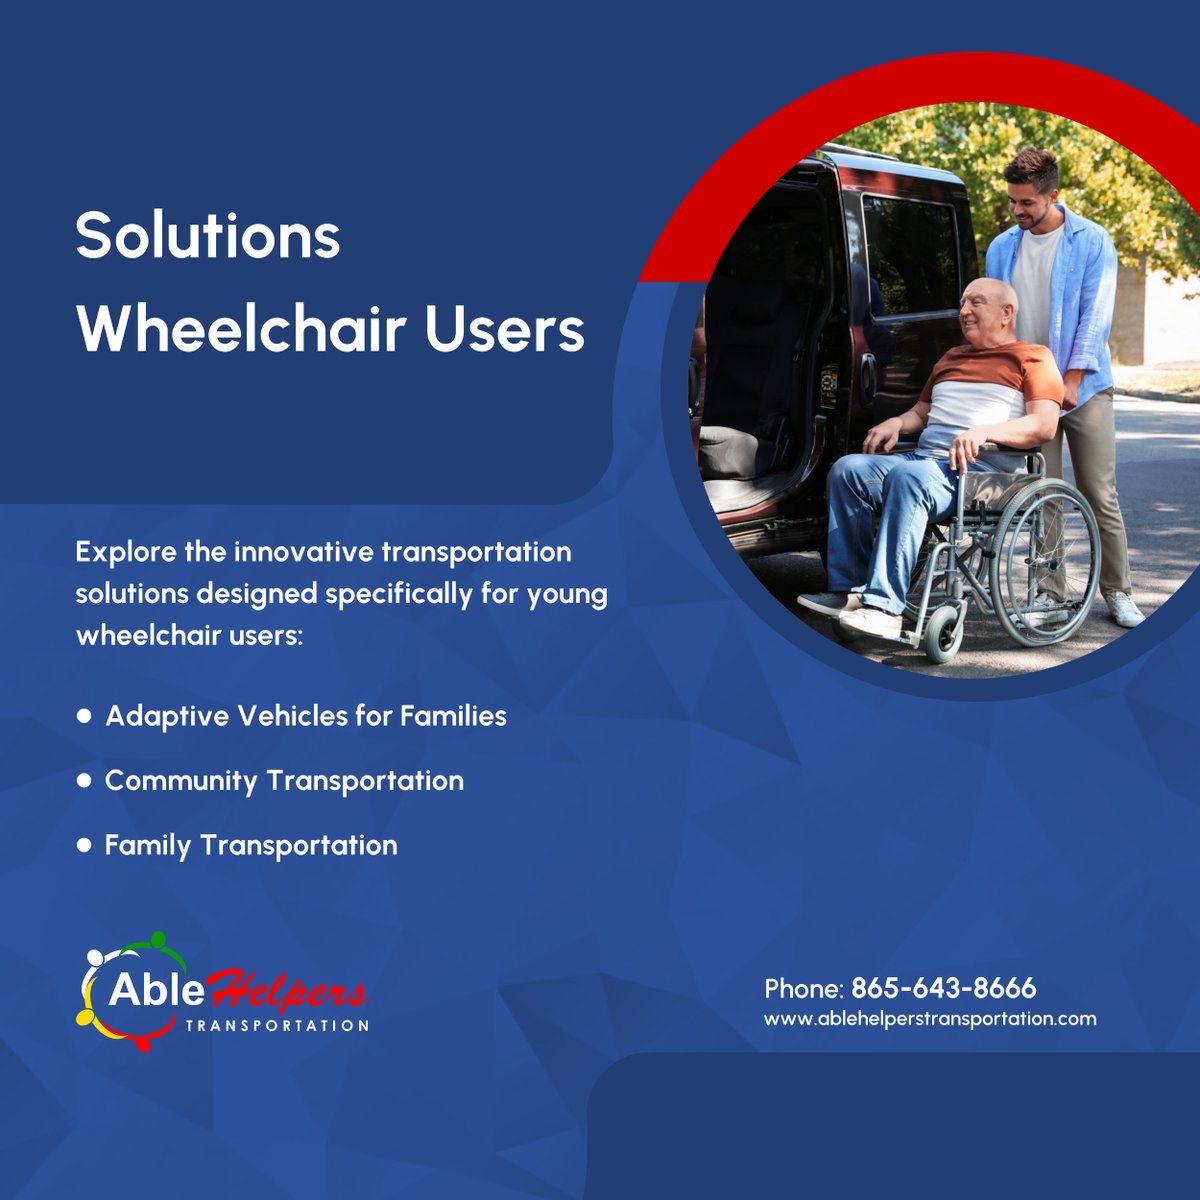 Ensuring seamless and safe transportation for pediatric wheelchair users is essential for their accessibility to healthcare, education, and daily activities. Feel free to call us if you have any questions.

#SafeTransportation #KnoxvilleTN #TransportationServices #WheelchairUsers